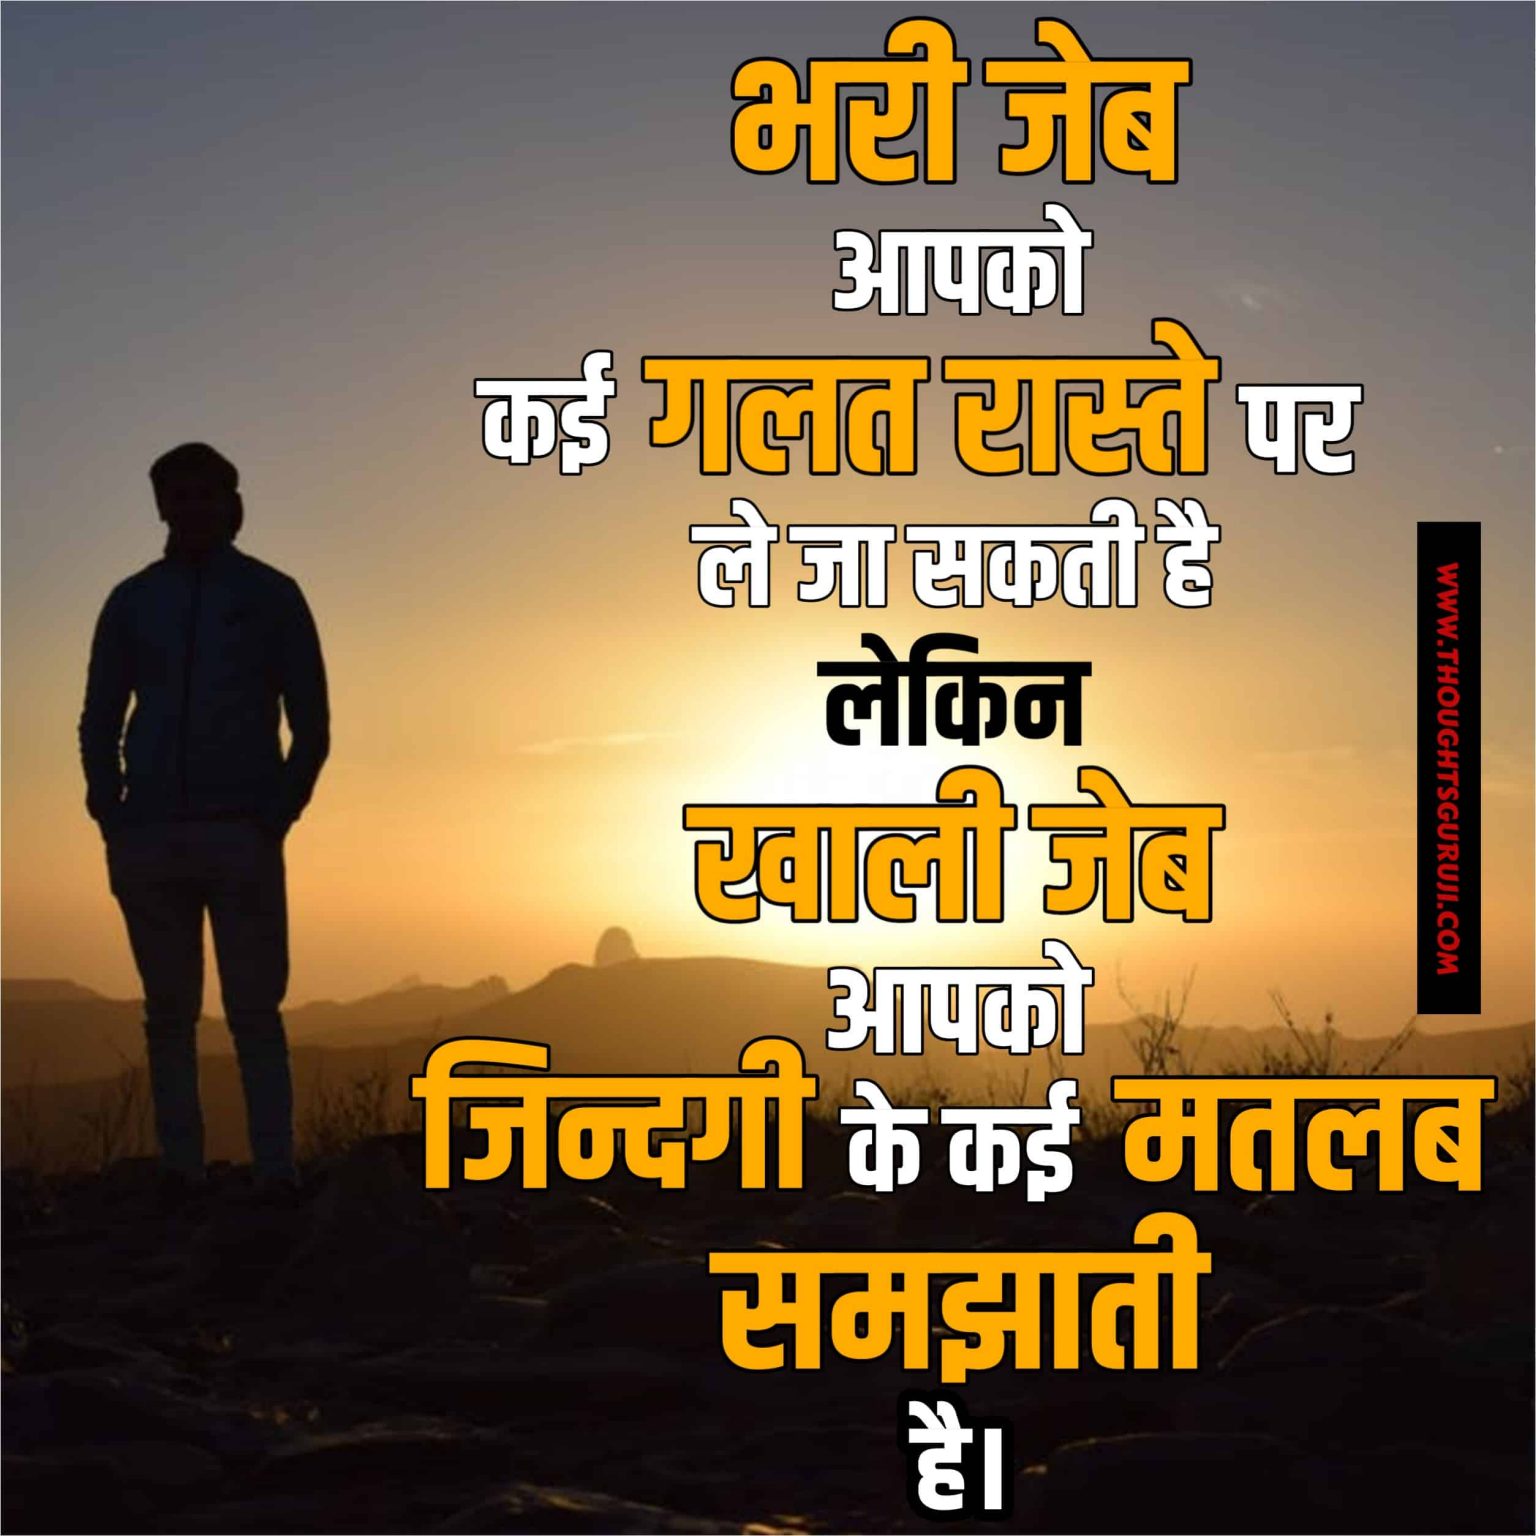 Best Motivational Quotes In Hindi 22 1536x1536 